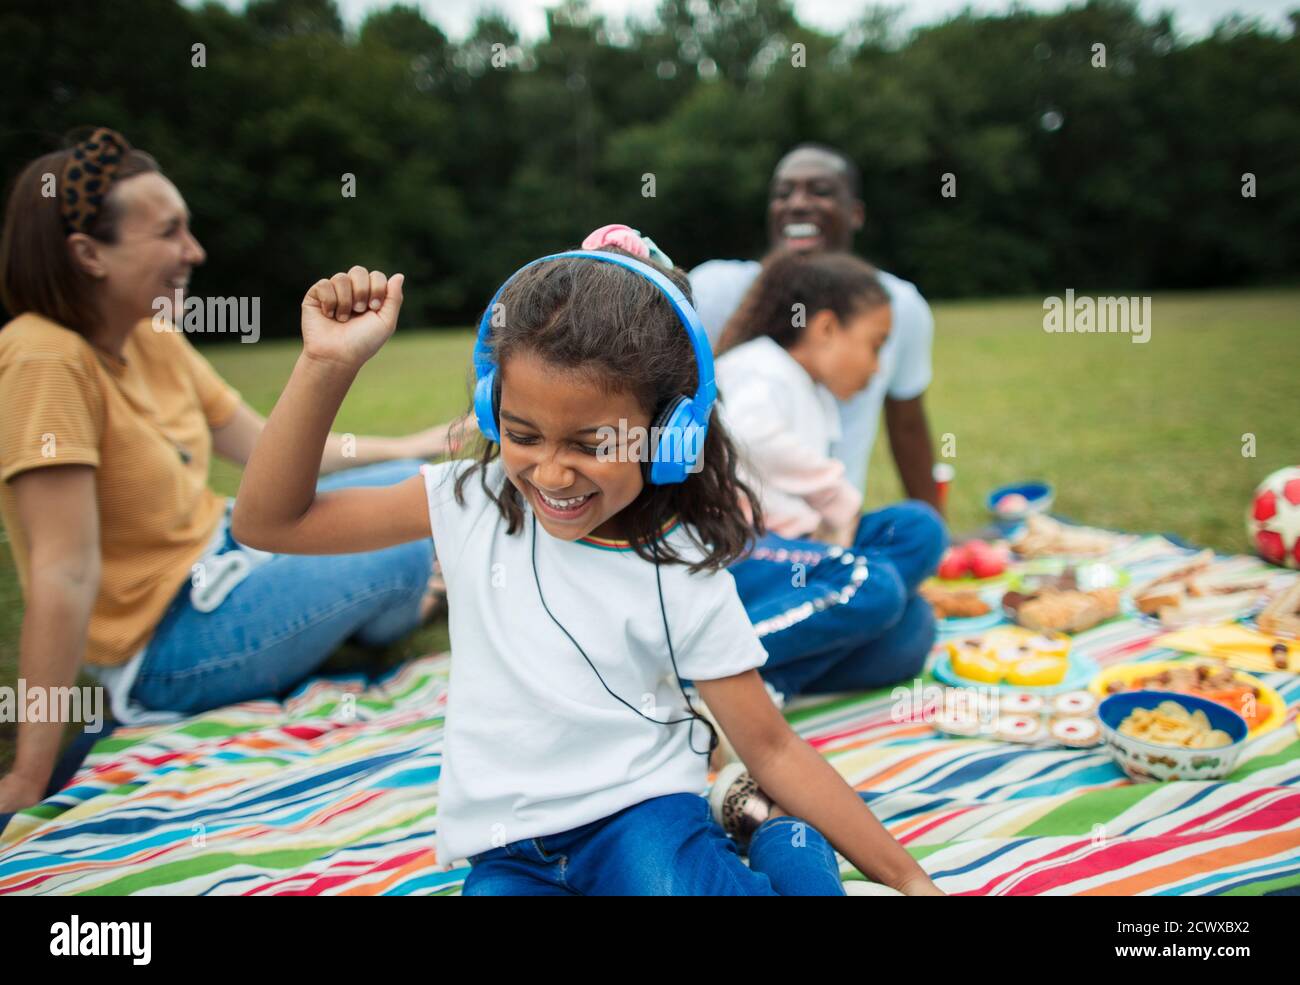 Carefree girl listening to music with headphones on picnic blanket Stock Photo